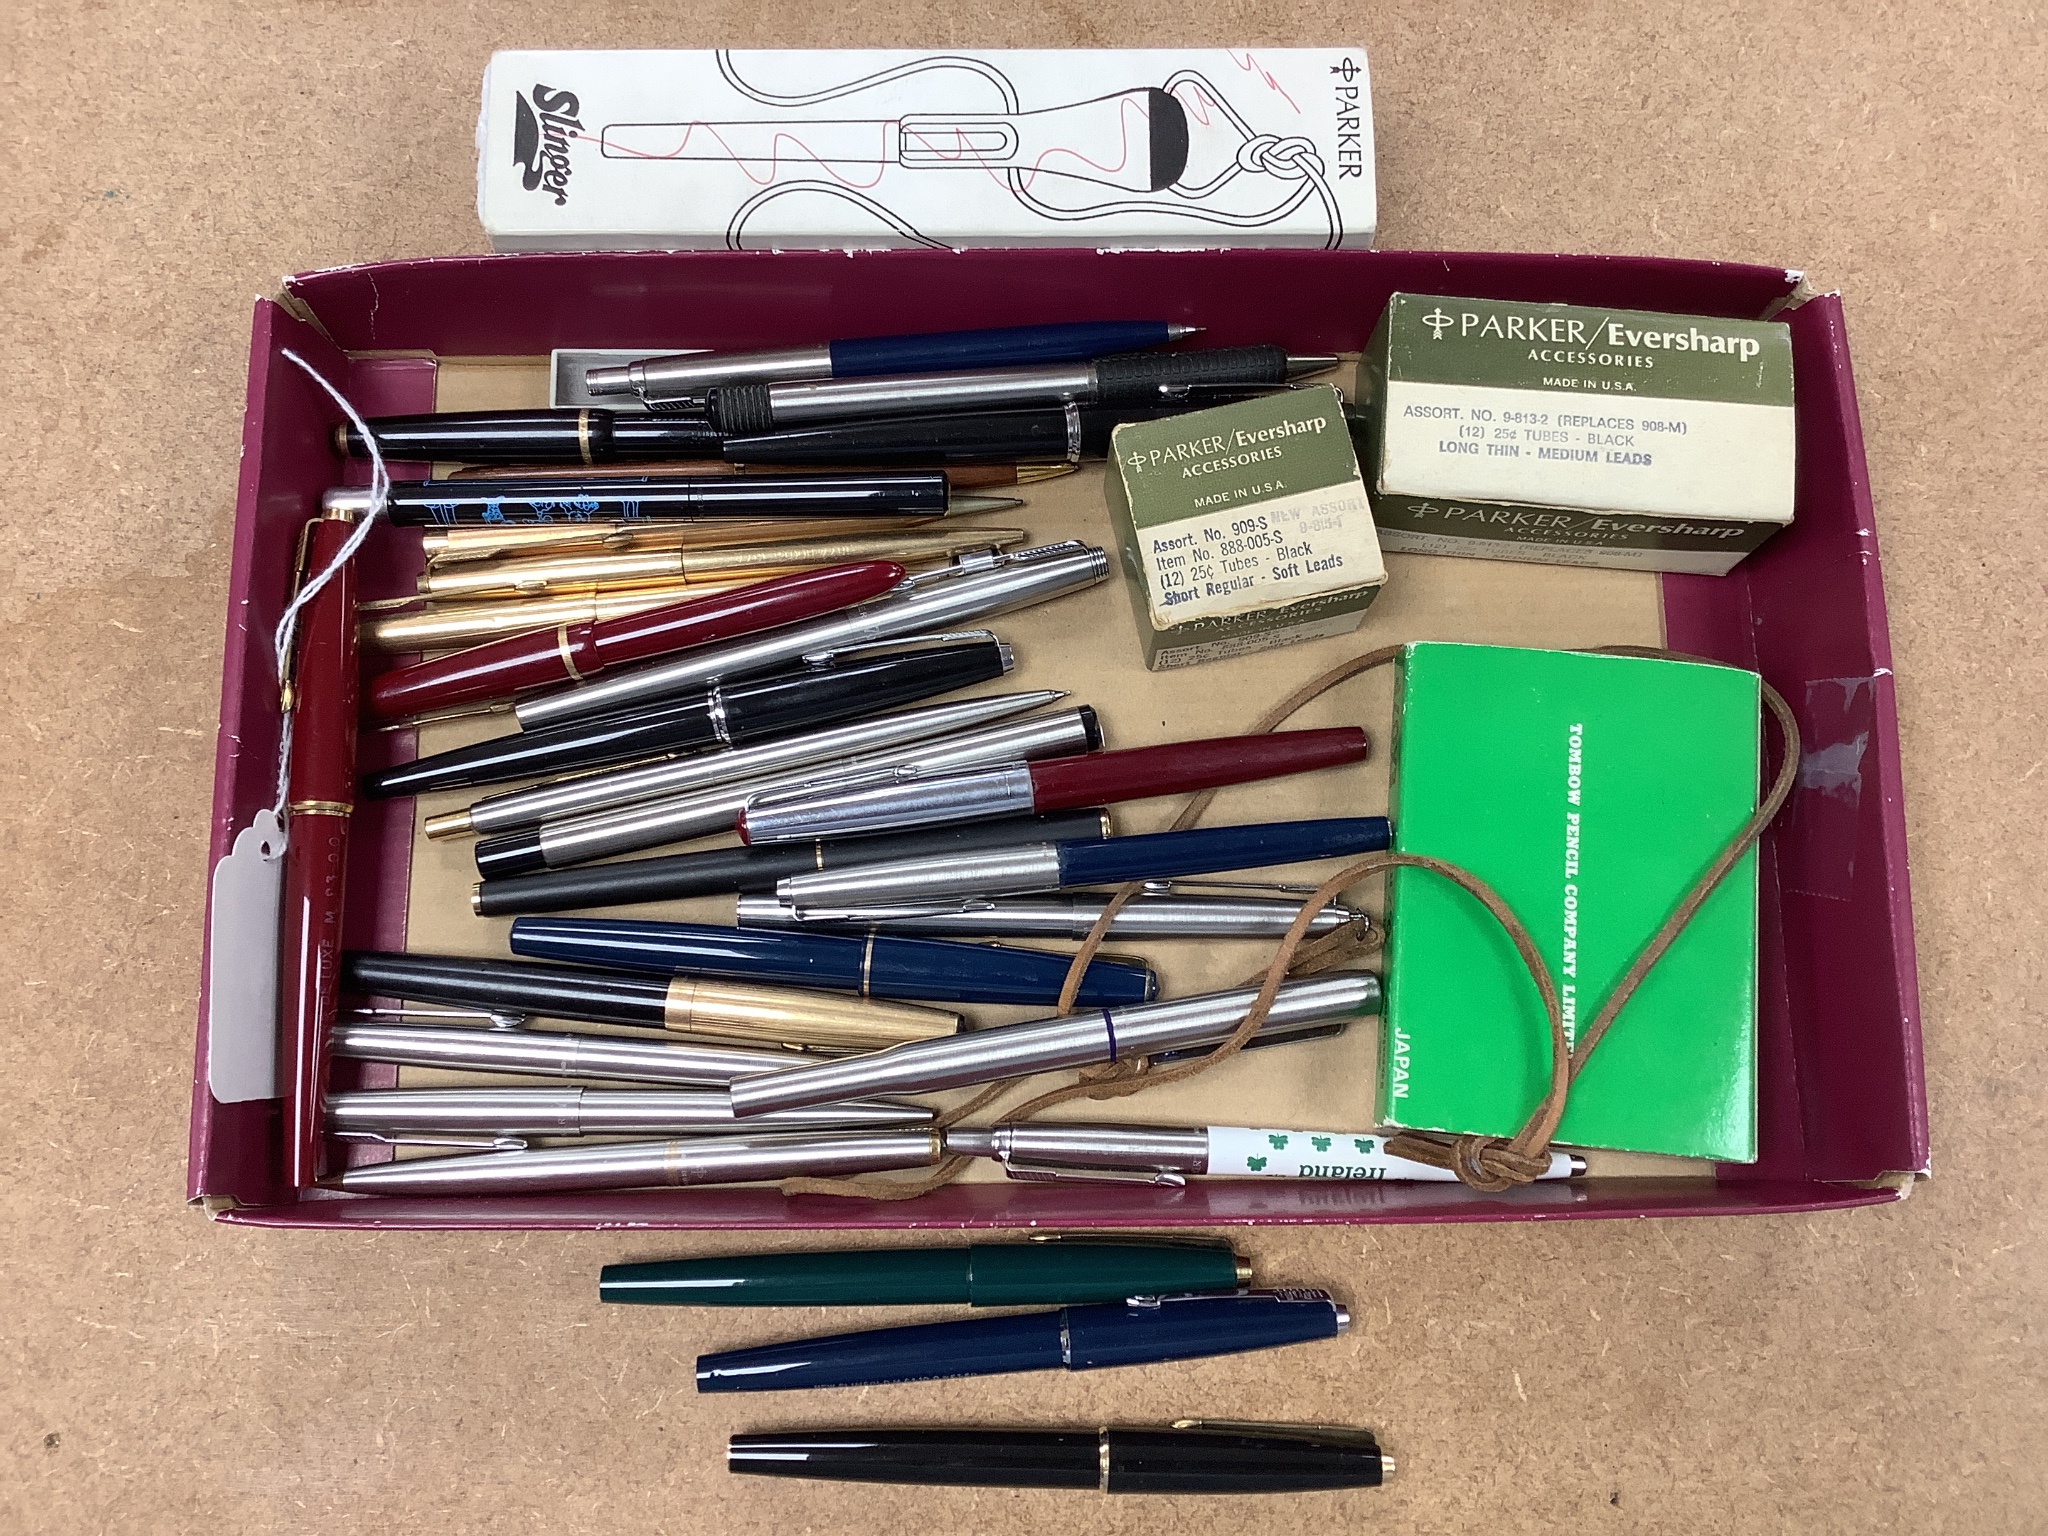 14 various Parker fountain pens and 12 Parker propelling pencils and roller balls, together with leads and 3 pen shells